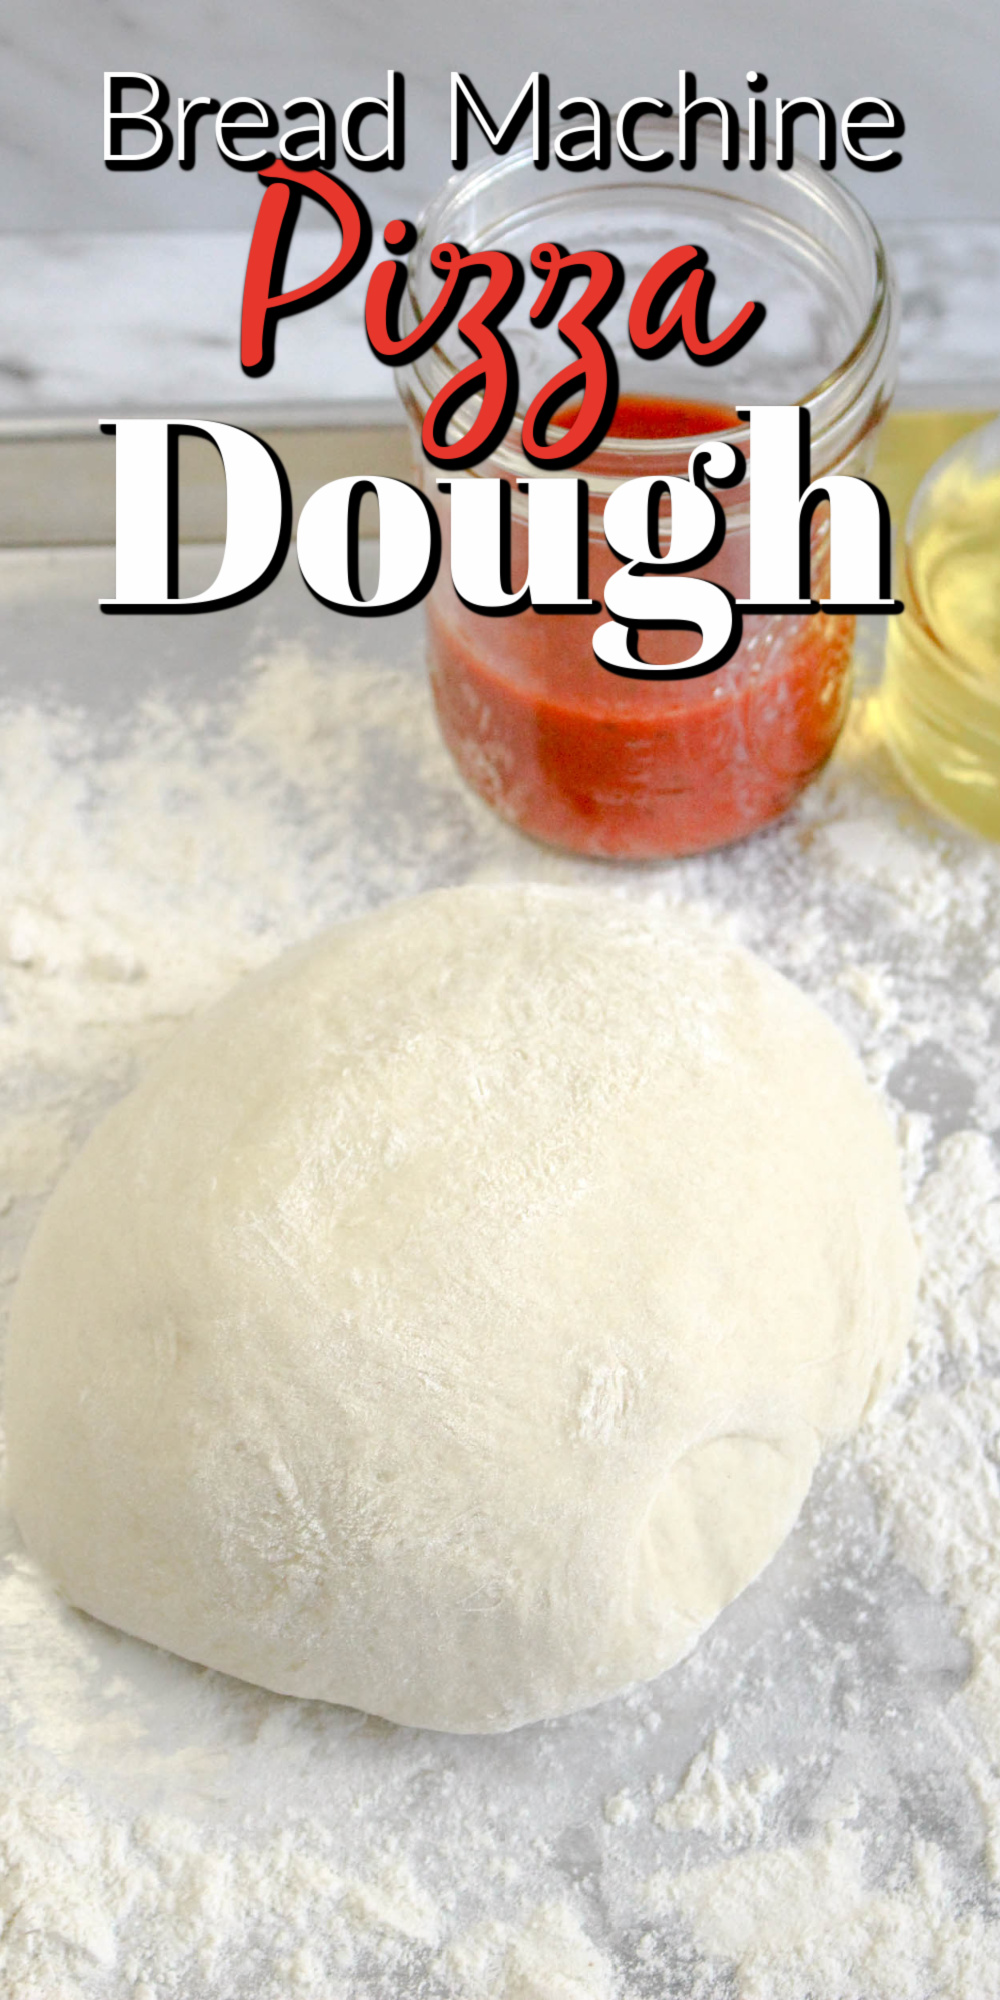 This super easy and fantastic Bread Machine Pizza Dough recipe is perfect if you like thin crust pizza, thick crust pizza, or something in between. 